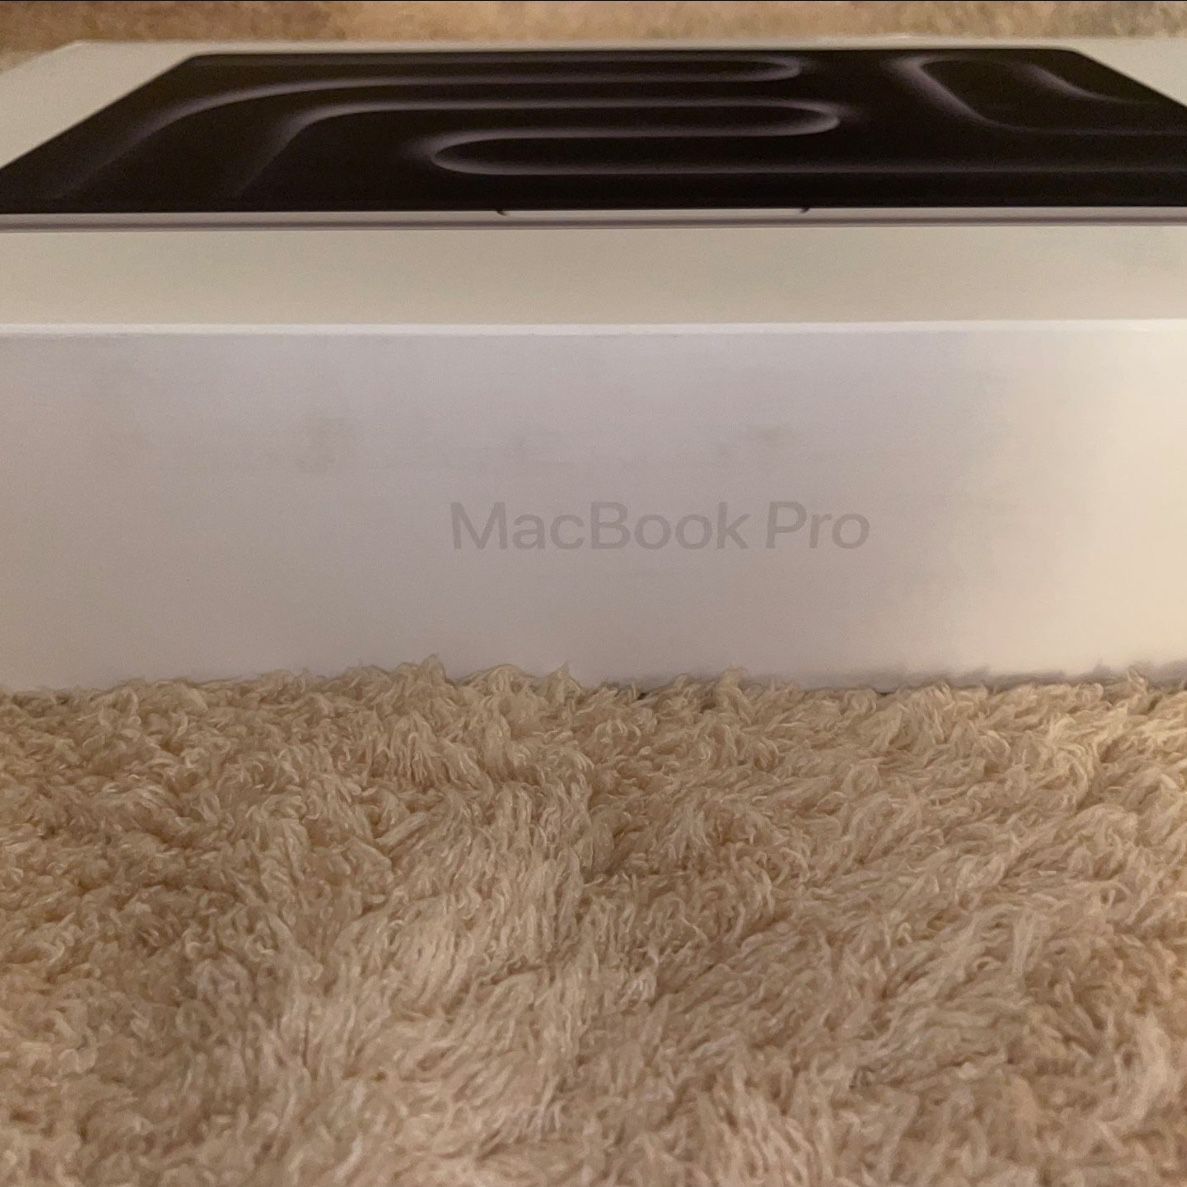 Upgraded/High-End Model - 14-inch MacBook Pro - Silver (New Apple M3 Chip & 1TB SSD Storage)